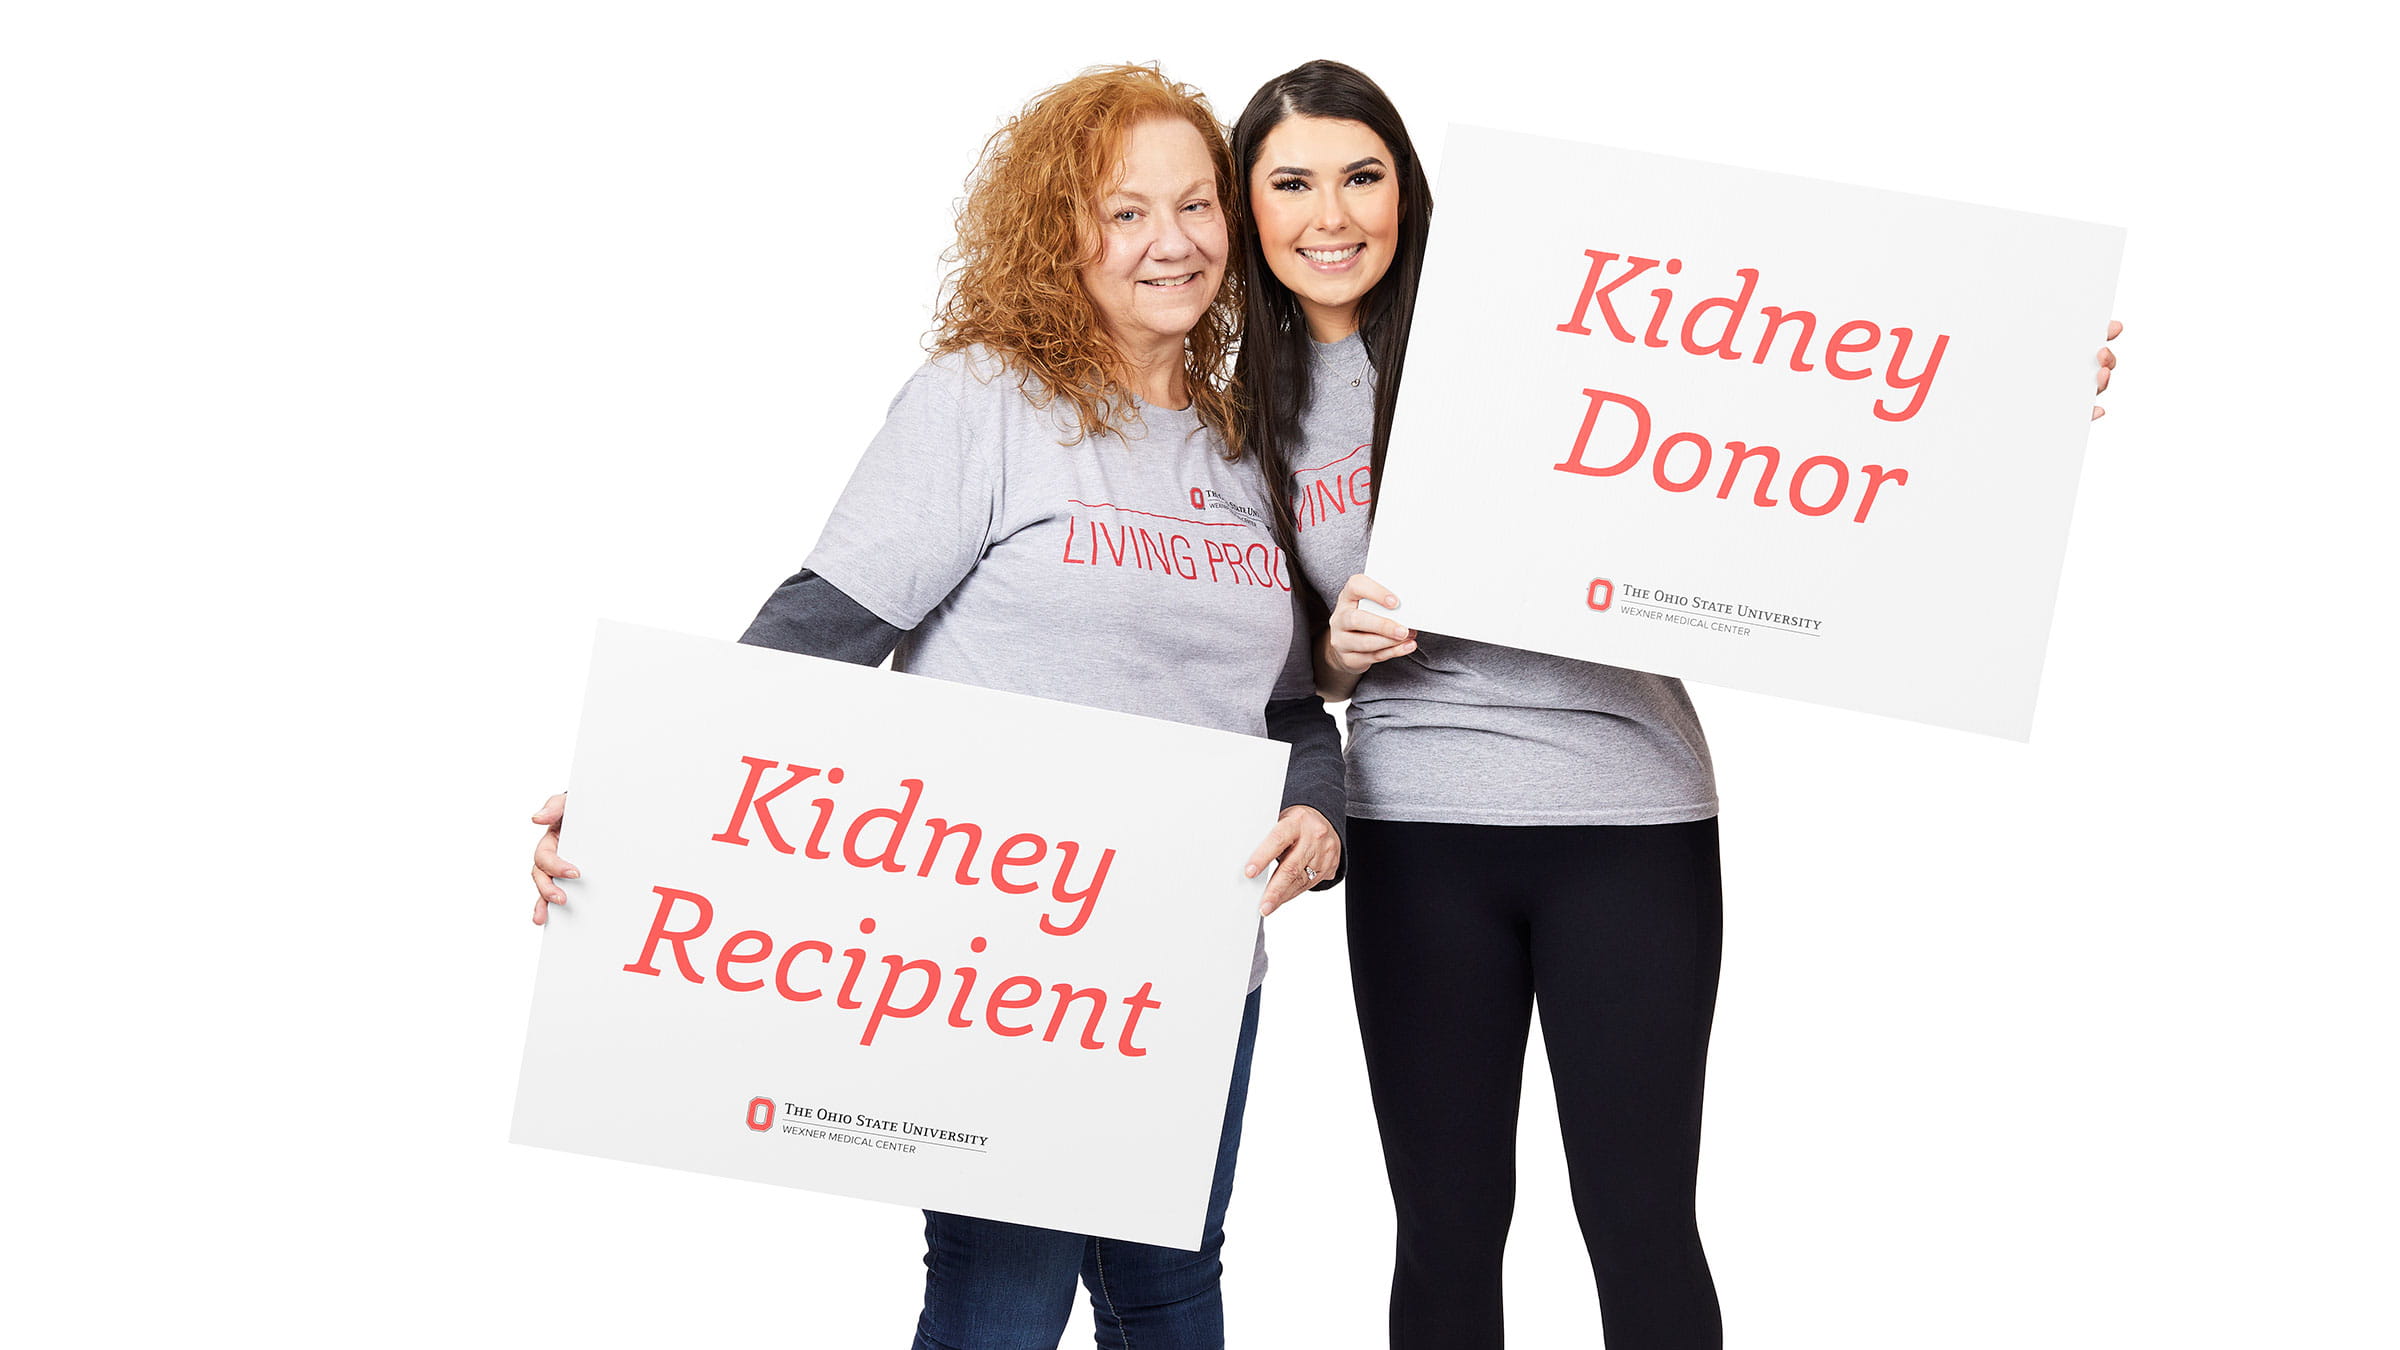 A kidney recipient with her daughter, a living donor